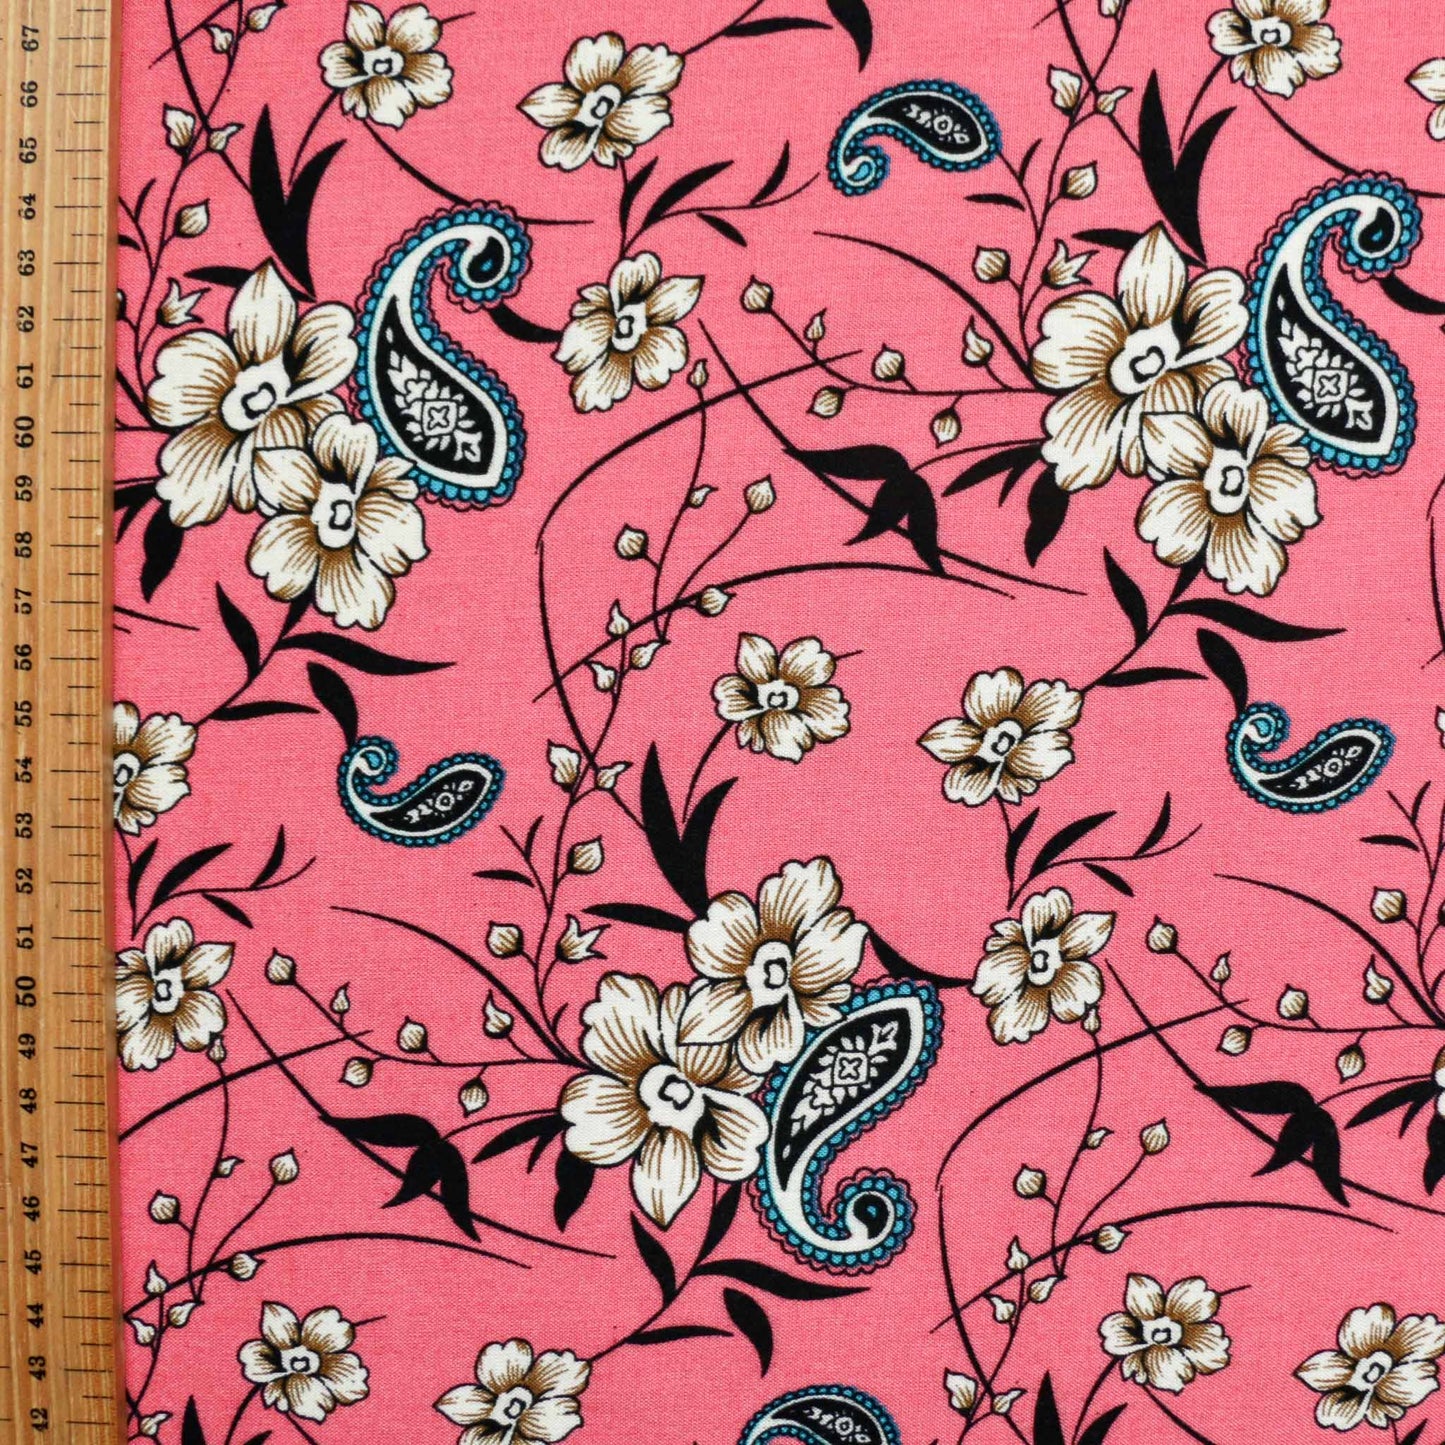 metre pink viscose challis dressmaking rayon fabric with floral print with classical pattern